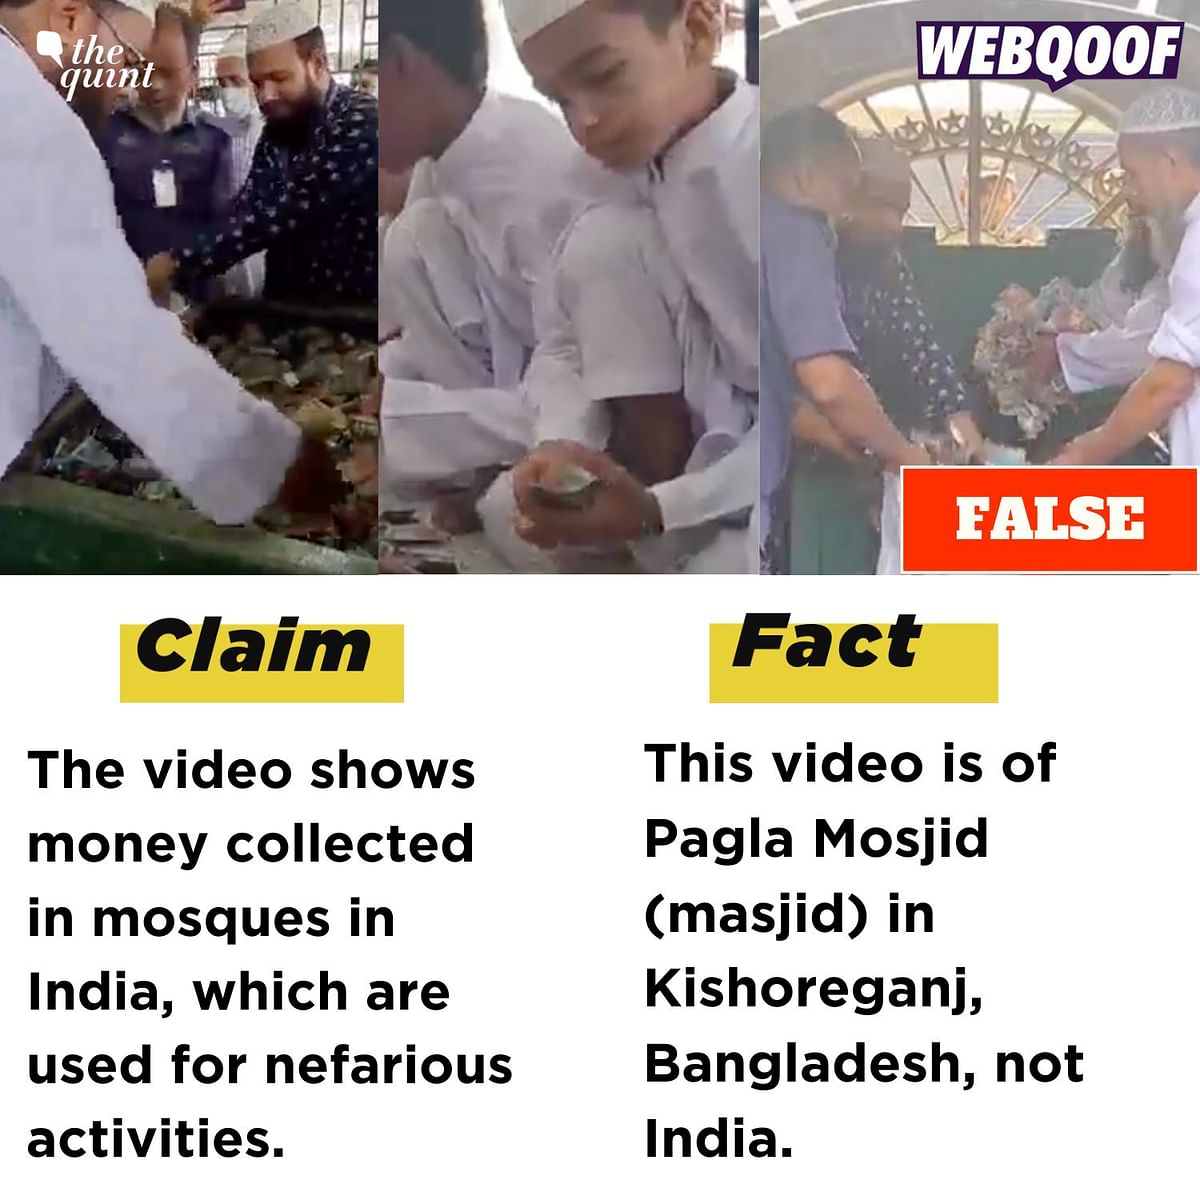 Take a look at these five pieces of misinformation that went viral on social media this week.